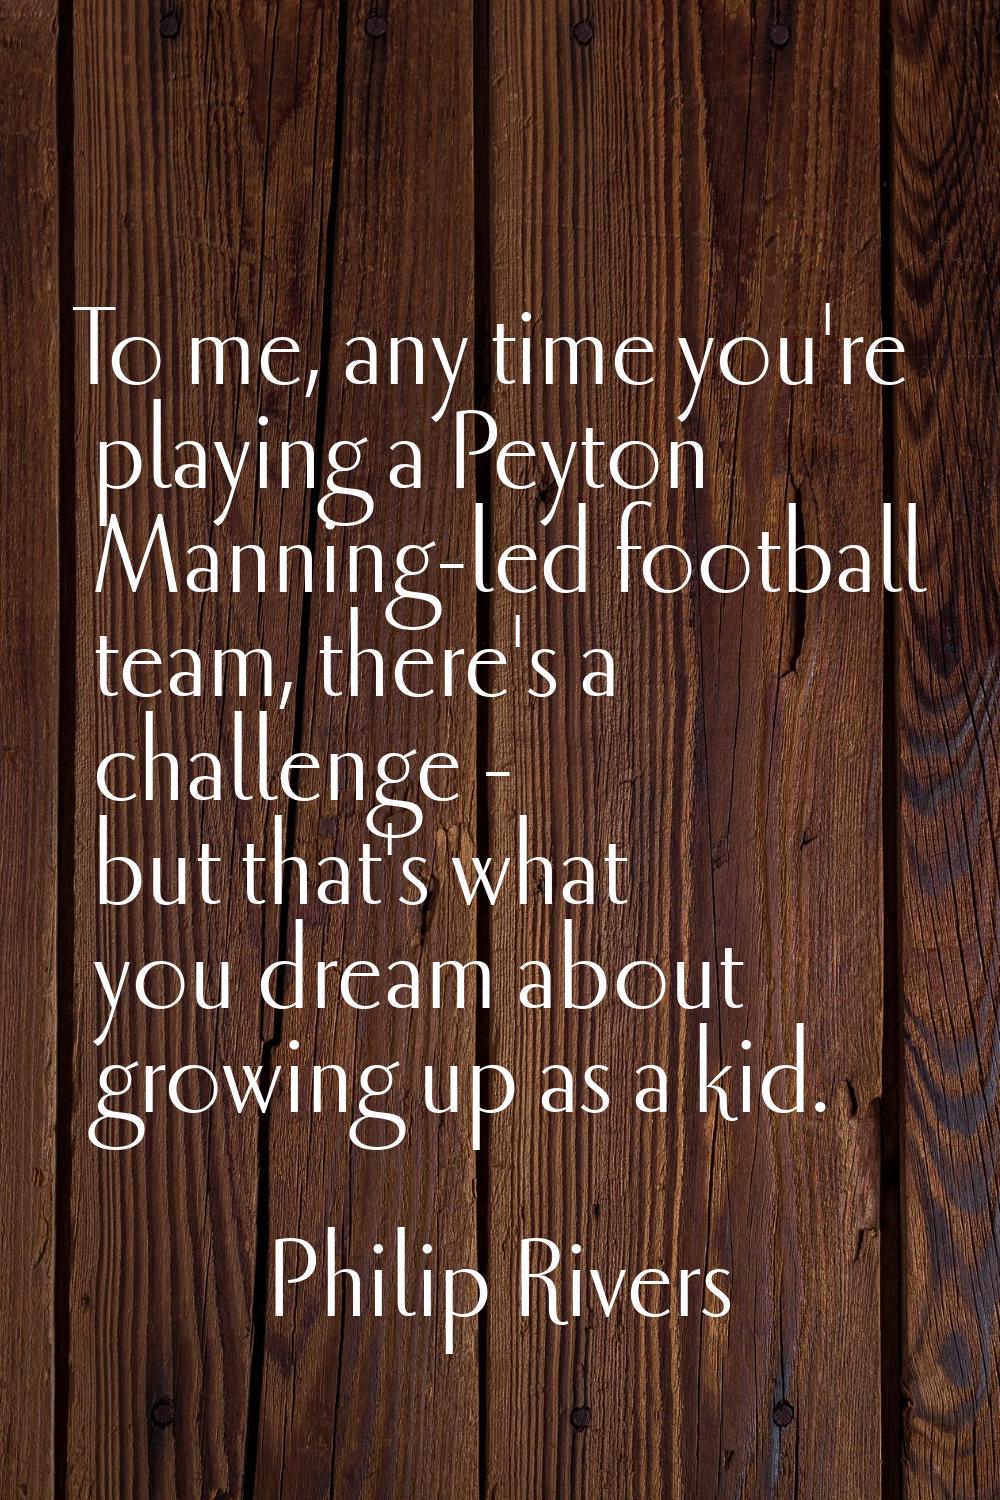 To me, any time you're playing a Peyton Manning-led football team, there's a challenge - but that's